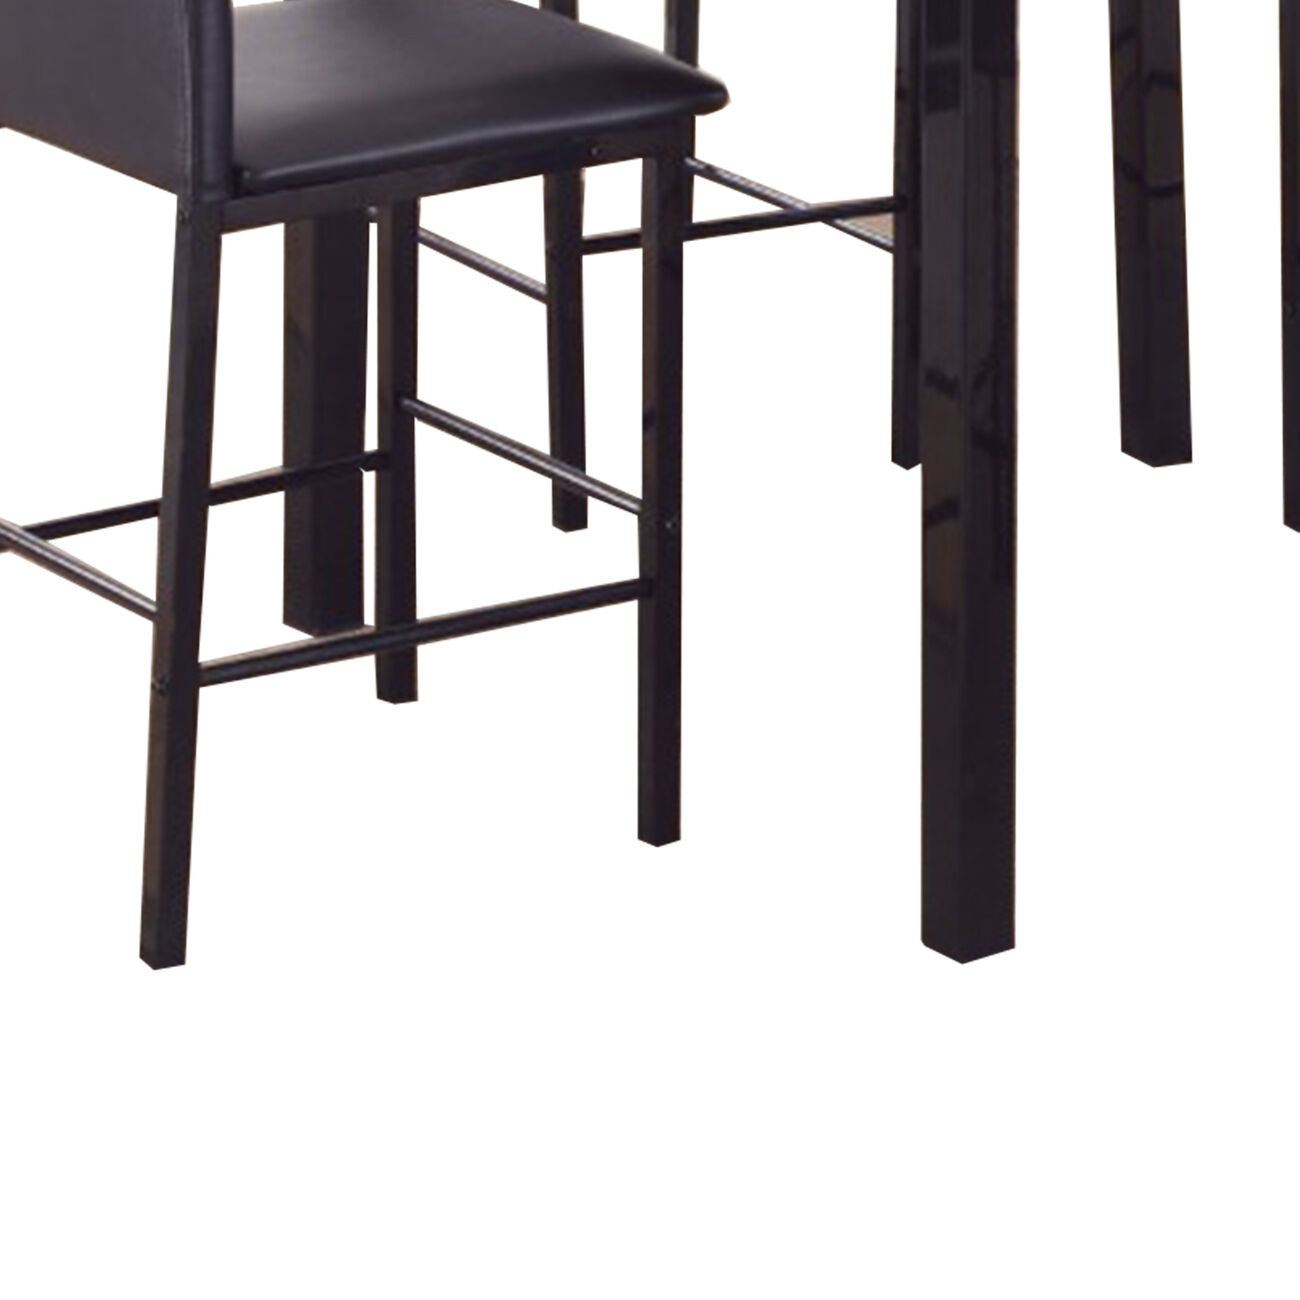 5-Piece Counter Height Dinette, Black/Brown